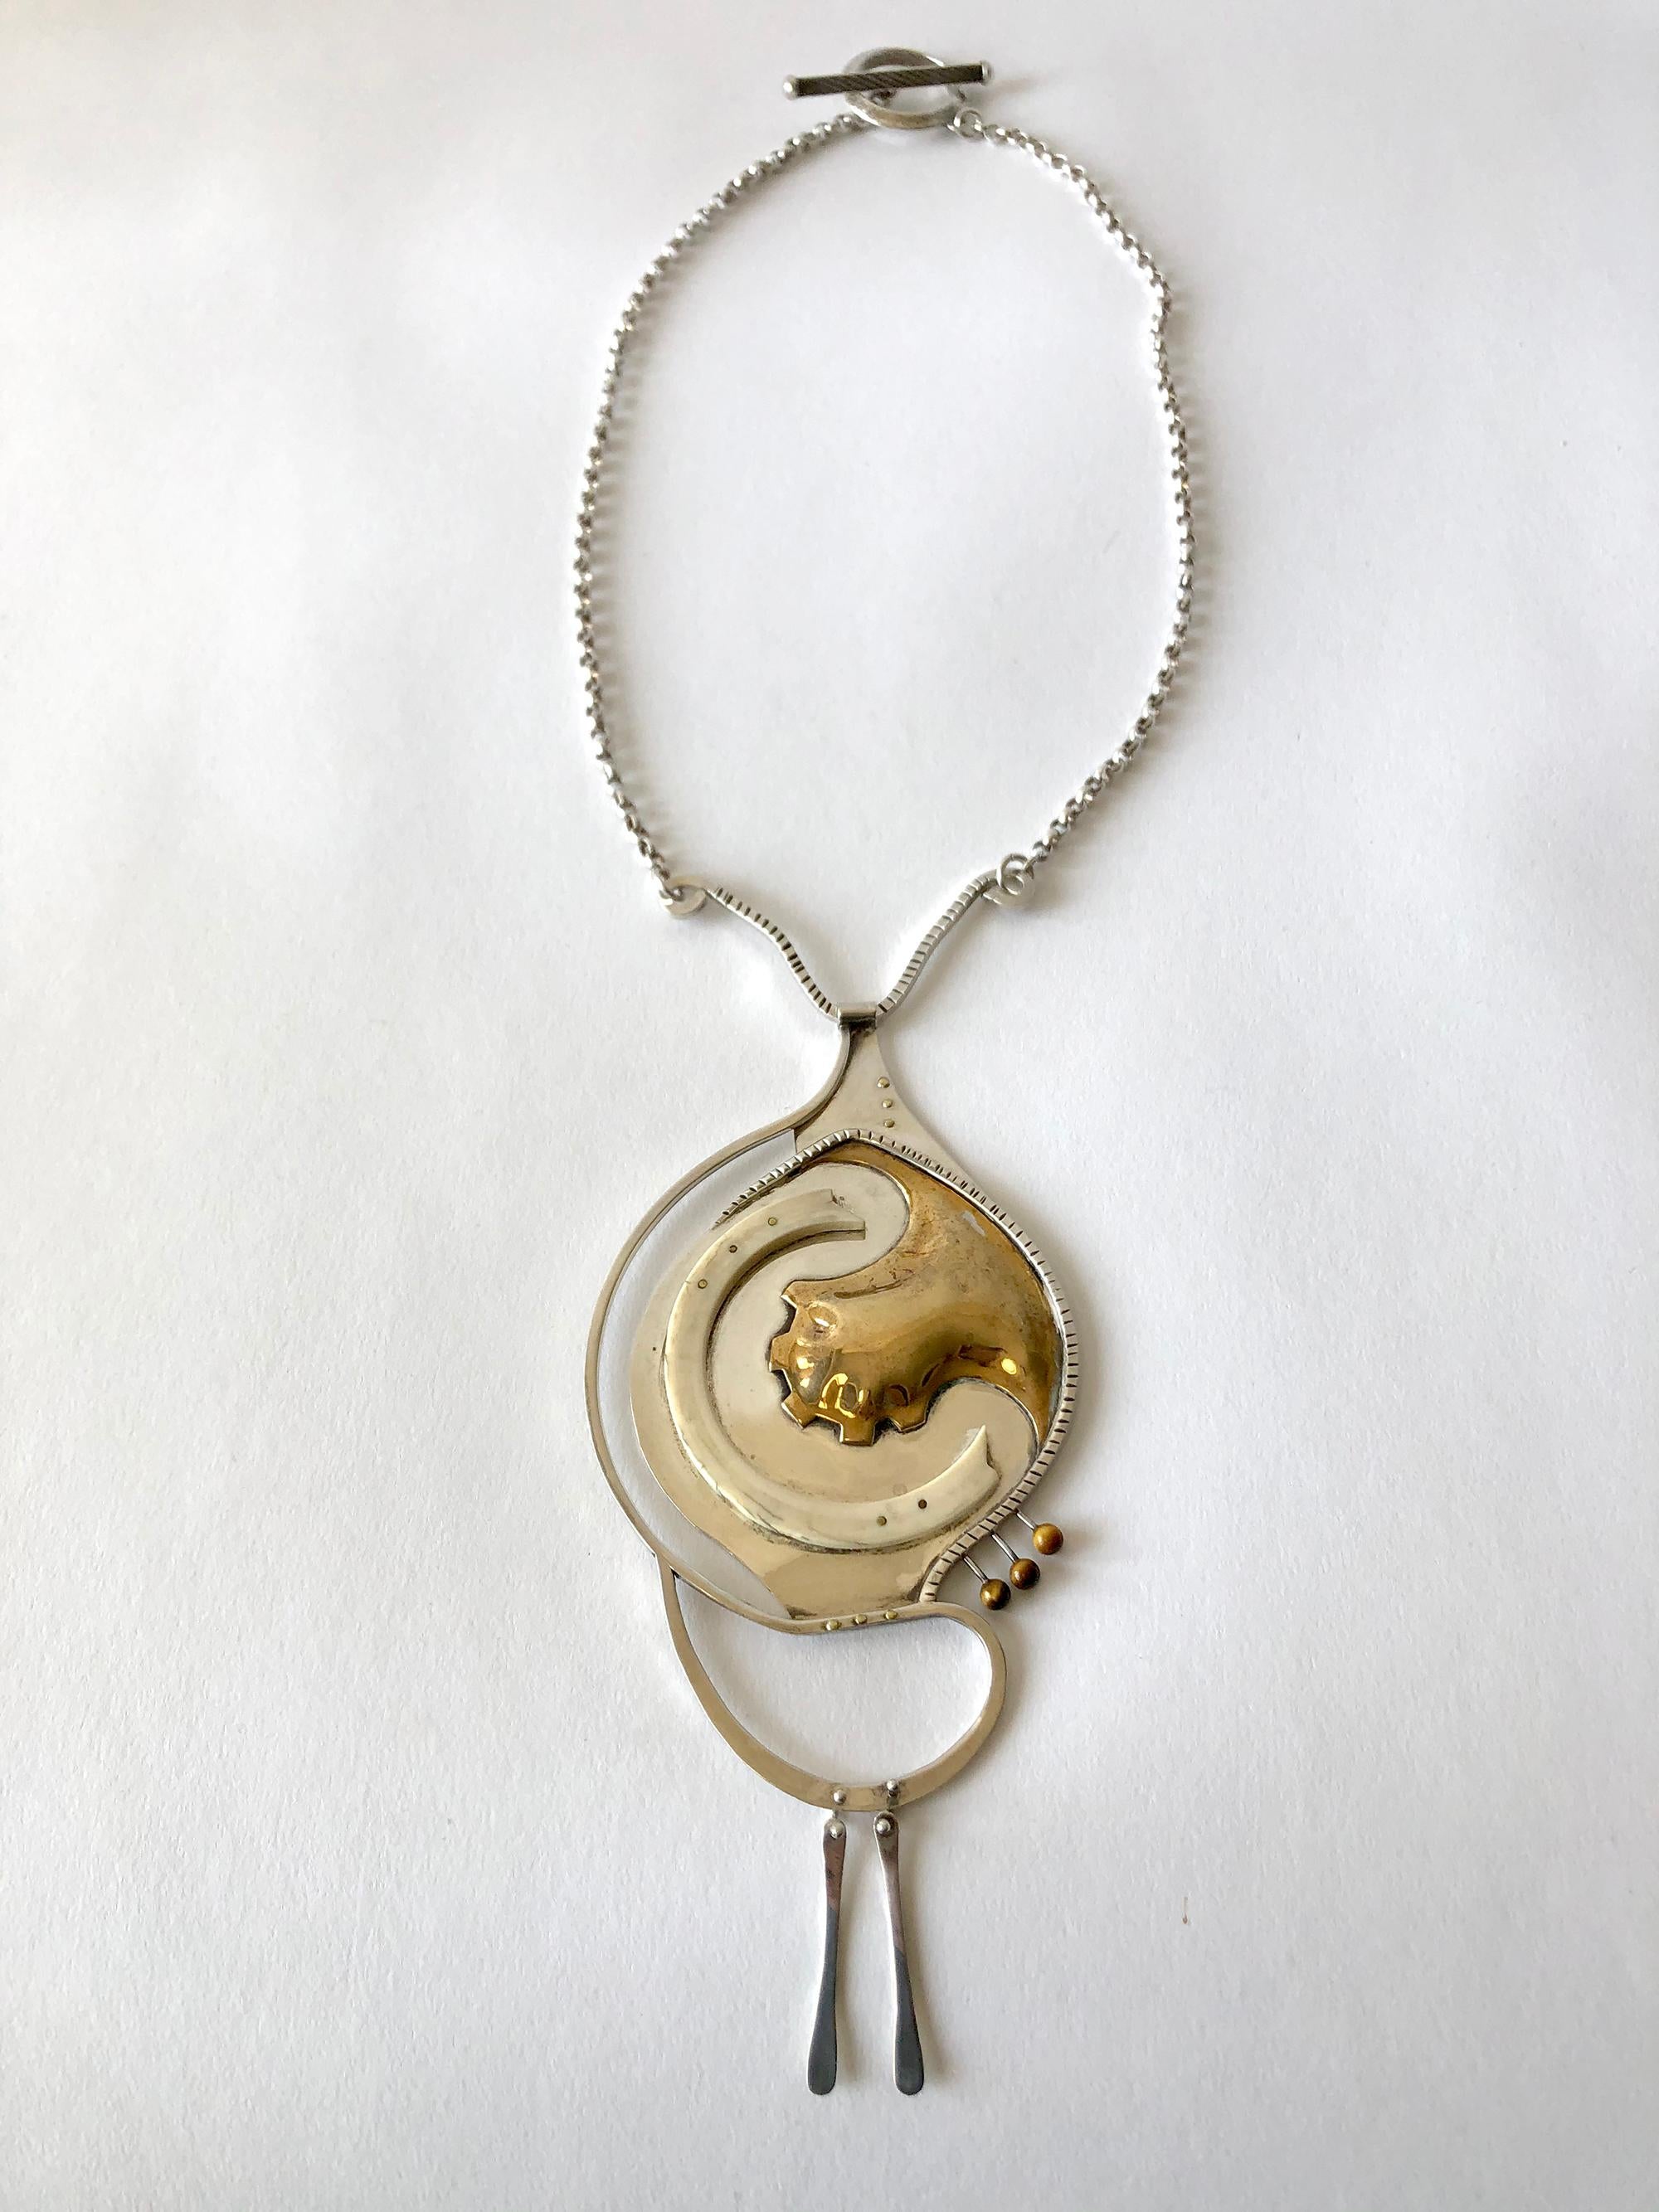 Handmade sterling silver and gold 1970's necklace with tiger eye and gold stud accents.  Necklace pendant measures 7.5